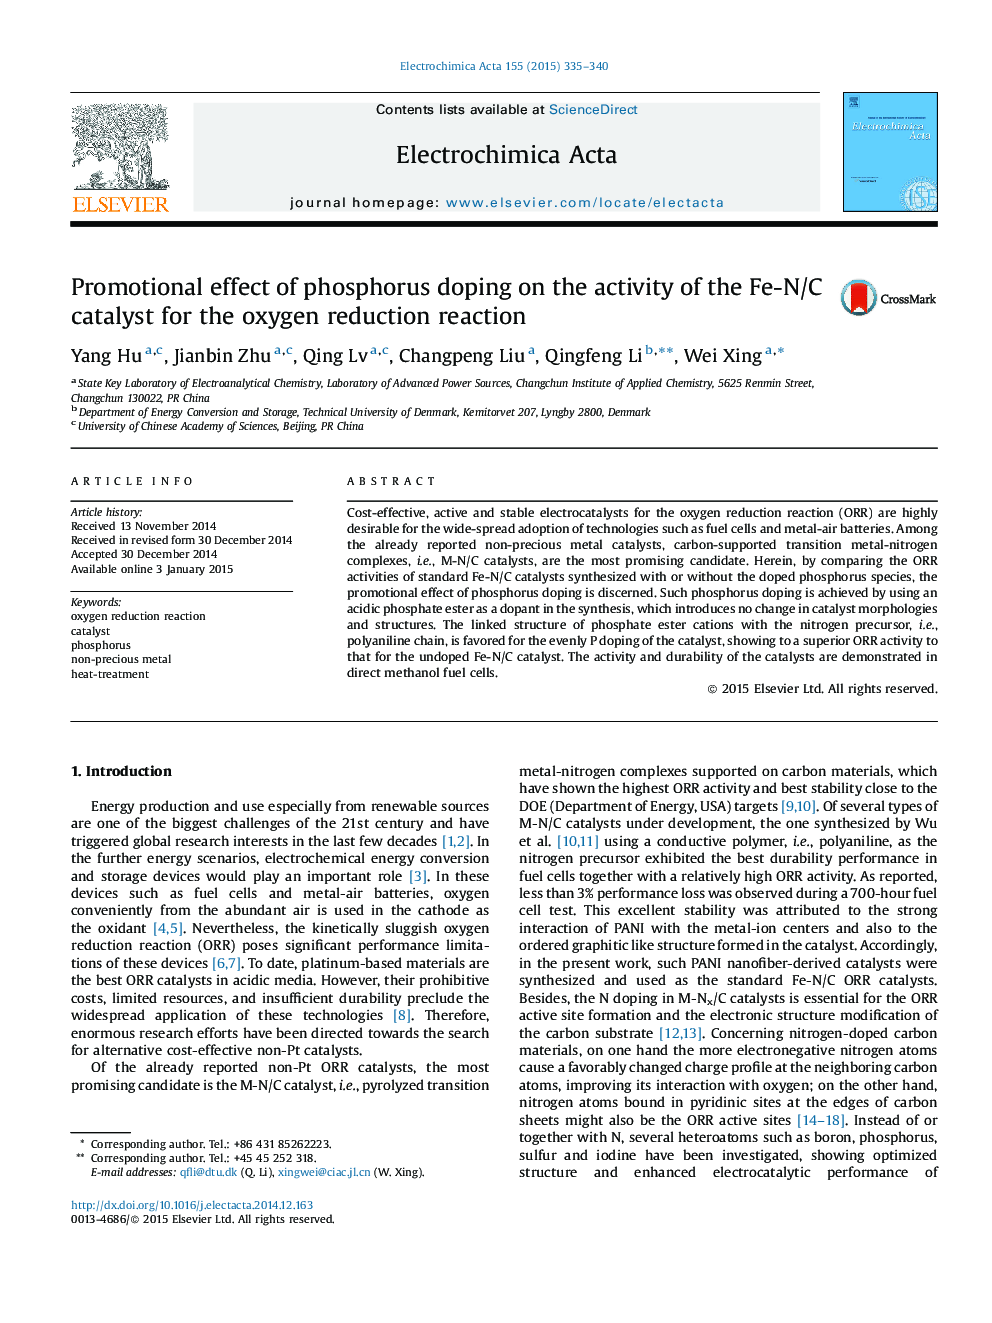 Promotional effect of phosphorus doping on the activity of the Fe-N/C catalyst for the oxygen reduction reaction